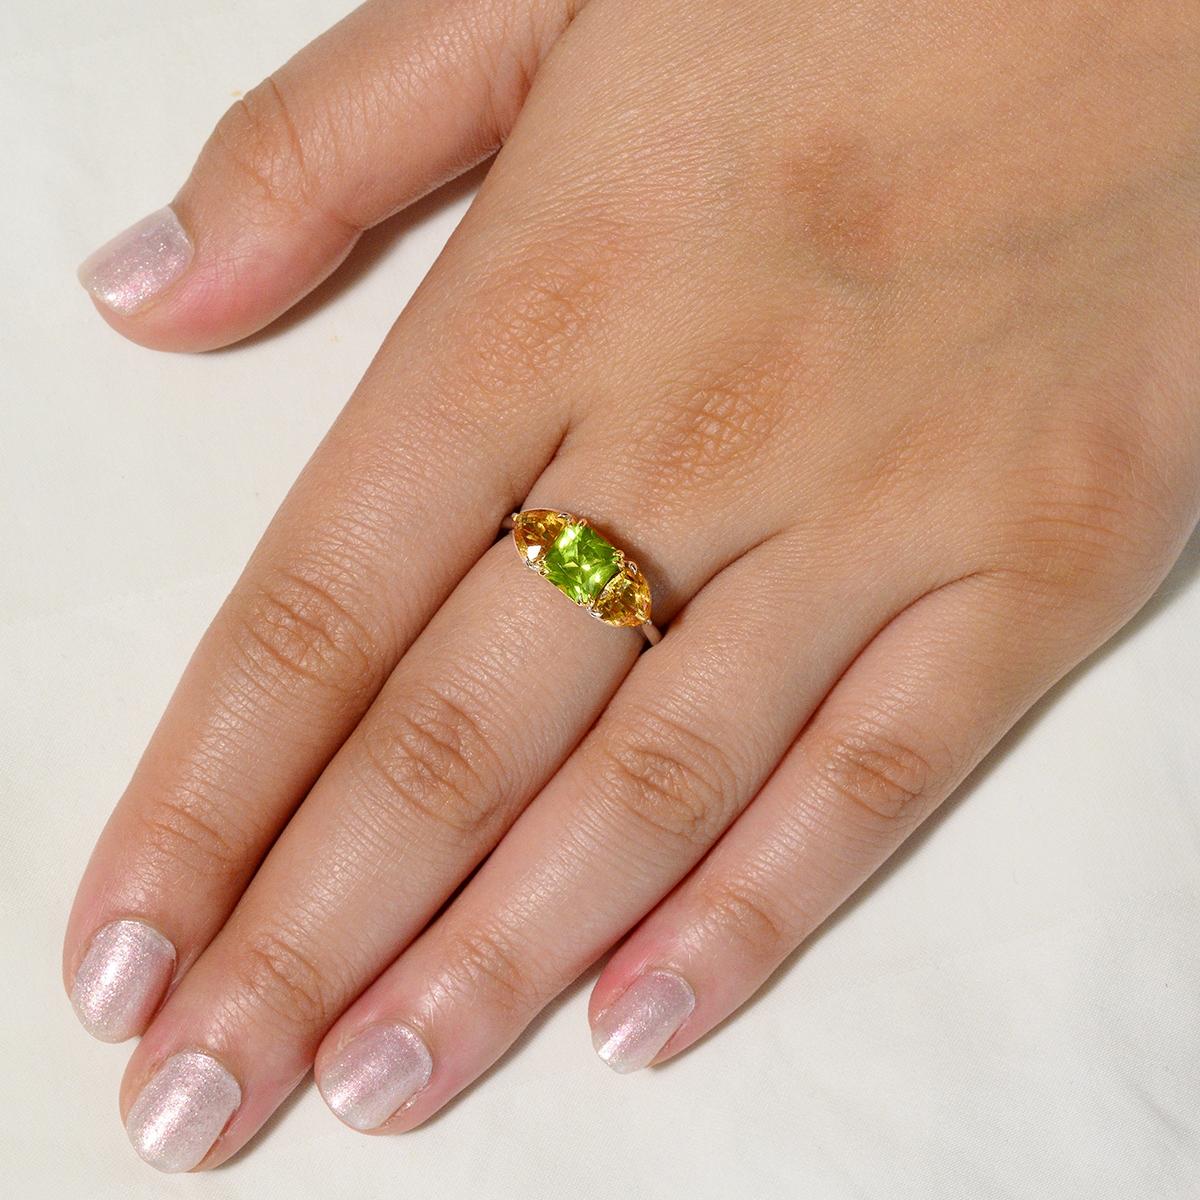 An EK Designs original this bold and distinctive ring features an alluring peridot gemstone flanked by golden citrines in 18K solid gold. The 1.80 carat natural asscher cut peridot measures 6.50mm by 6.50mm and sits in a unique 18k yellow gold